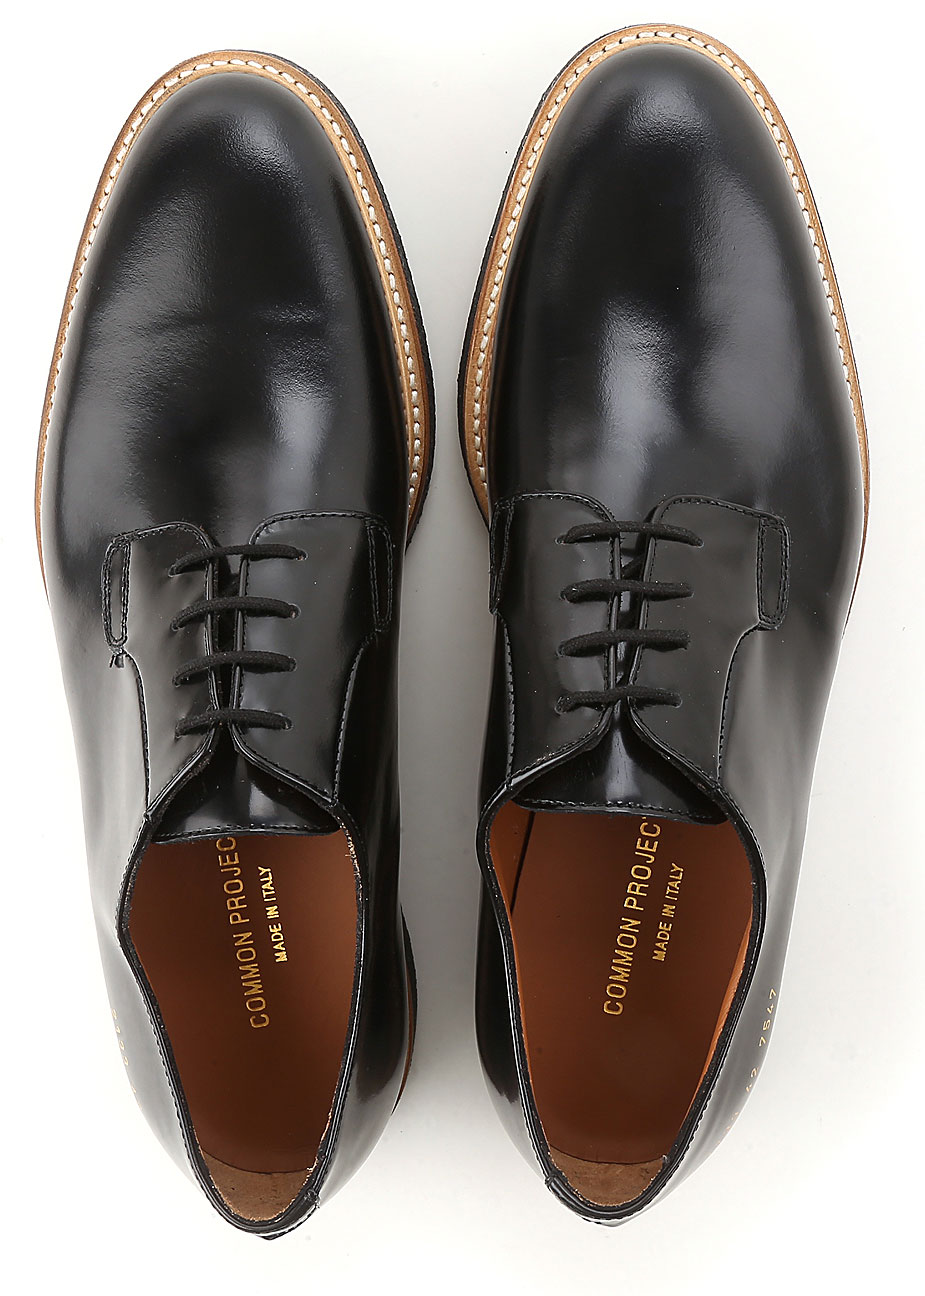 Mens Shoes Common Projects, Style code: 2133-7547-